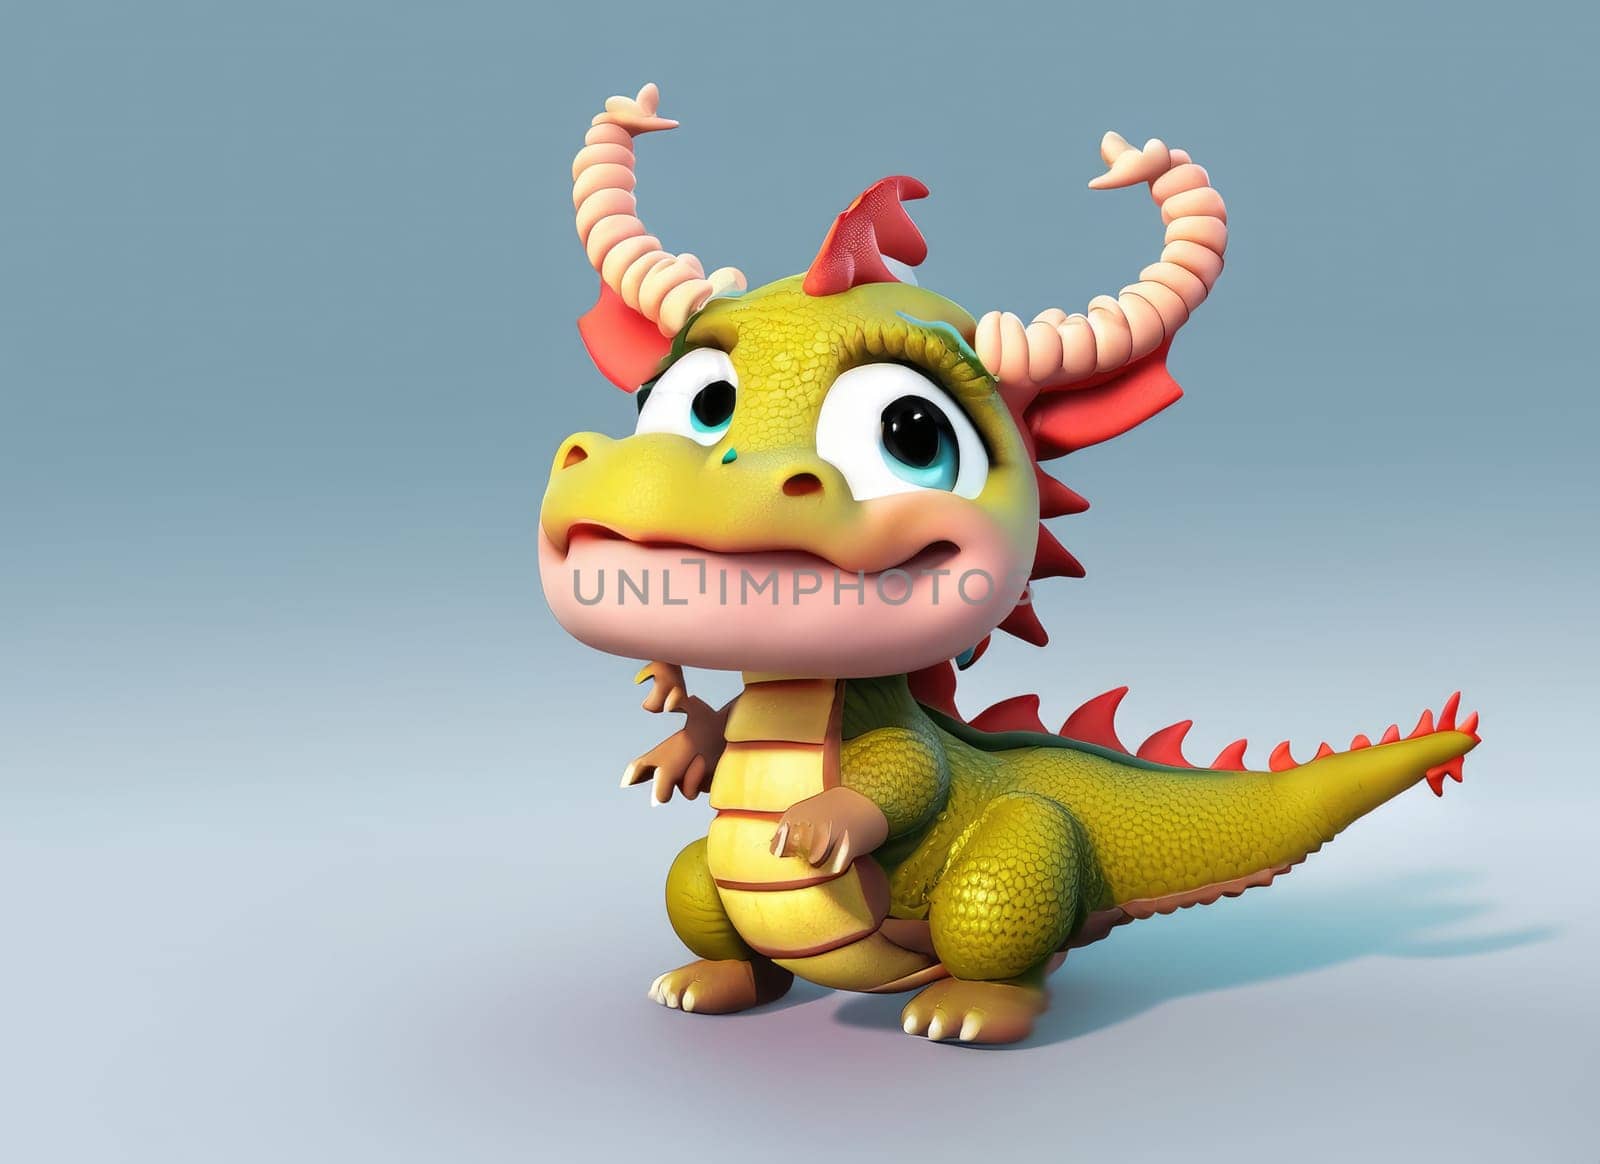 A Kawaii Baby Dragon. Bright and colorful 3D render computer generated. Adorable dragon baby with large eyes and realistic scales.